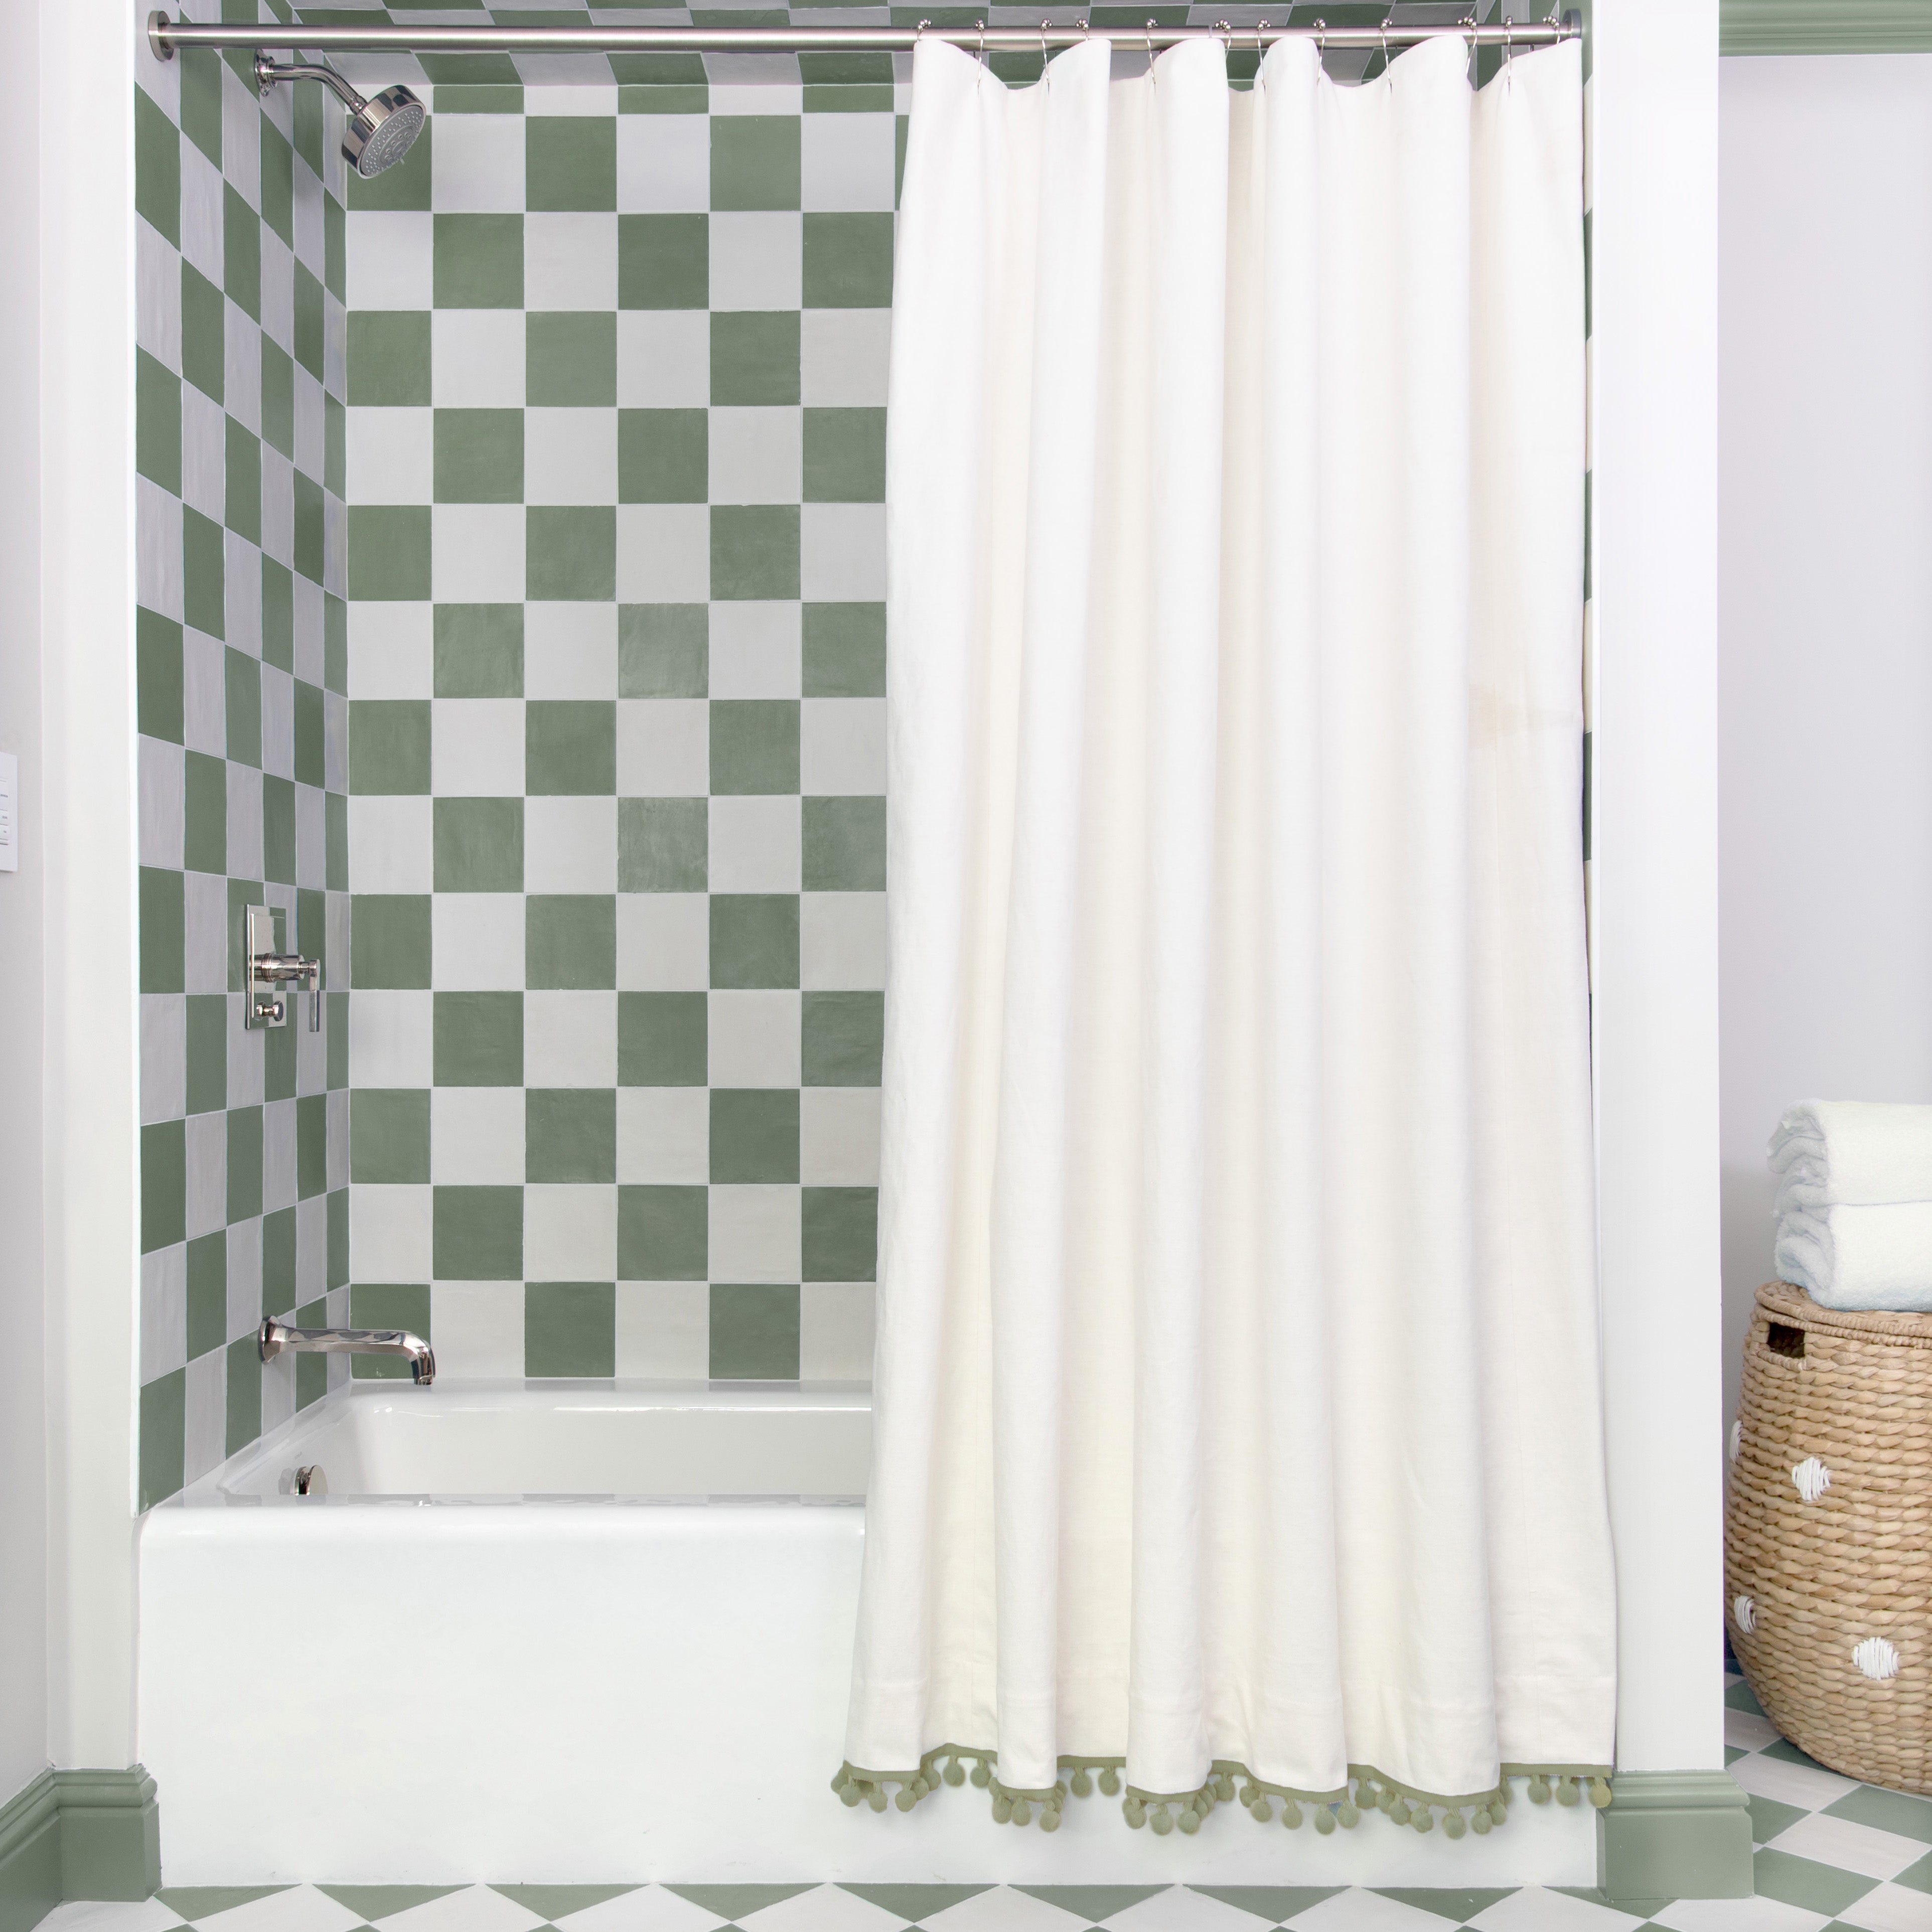 Natural White shower curtain hanging on rod in front of white tub in bathroom with green and white tiles